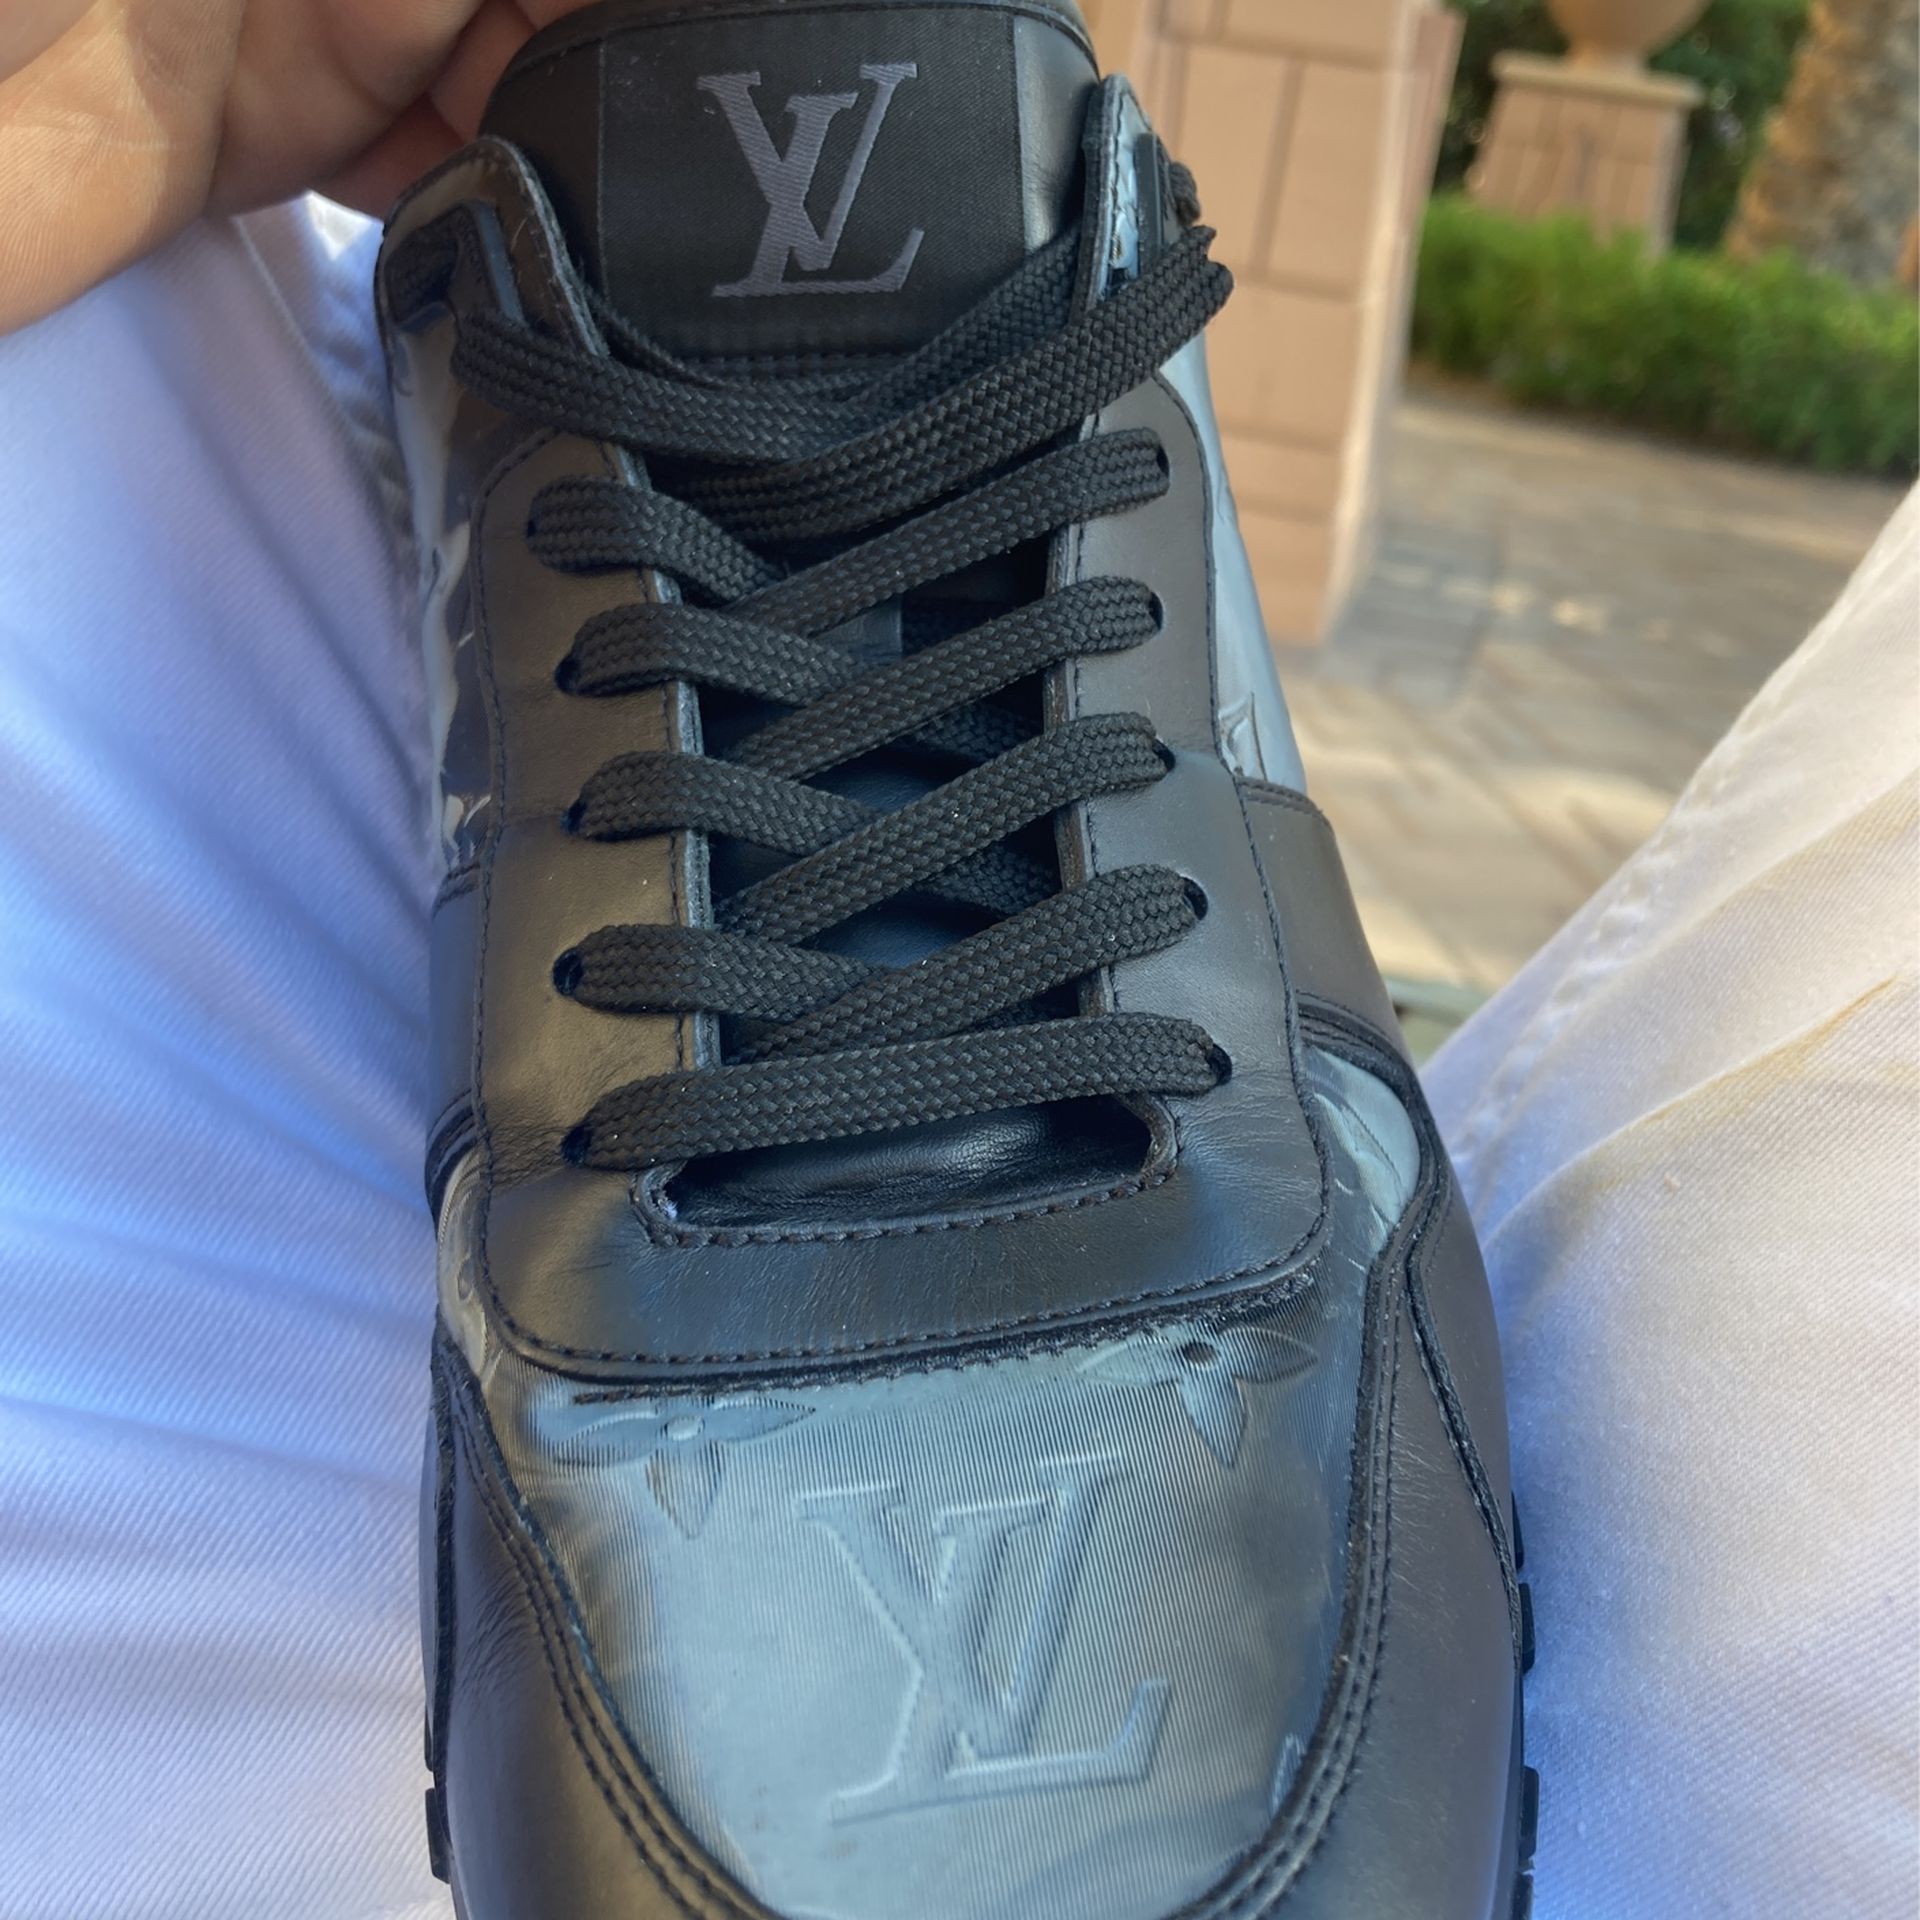 Mens Louie Vition Shoes 2020 Black Iridescent for Sale in Las Vegas, NV -  OfferUp